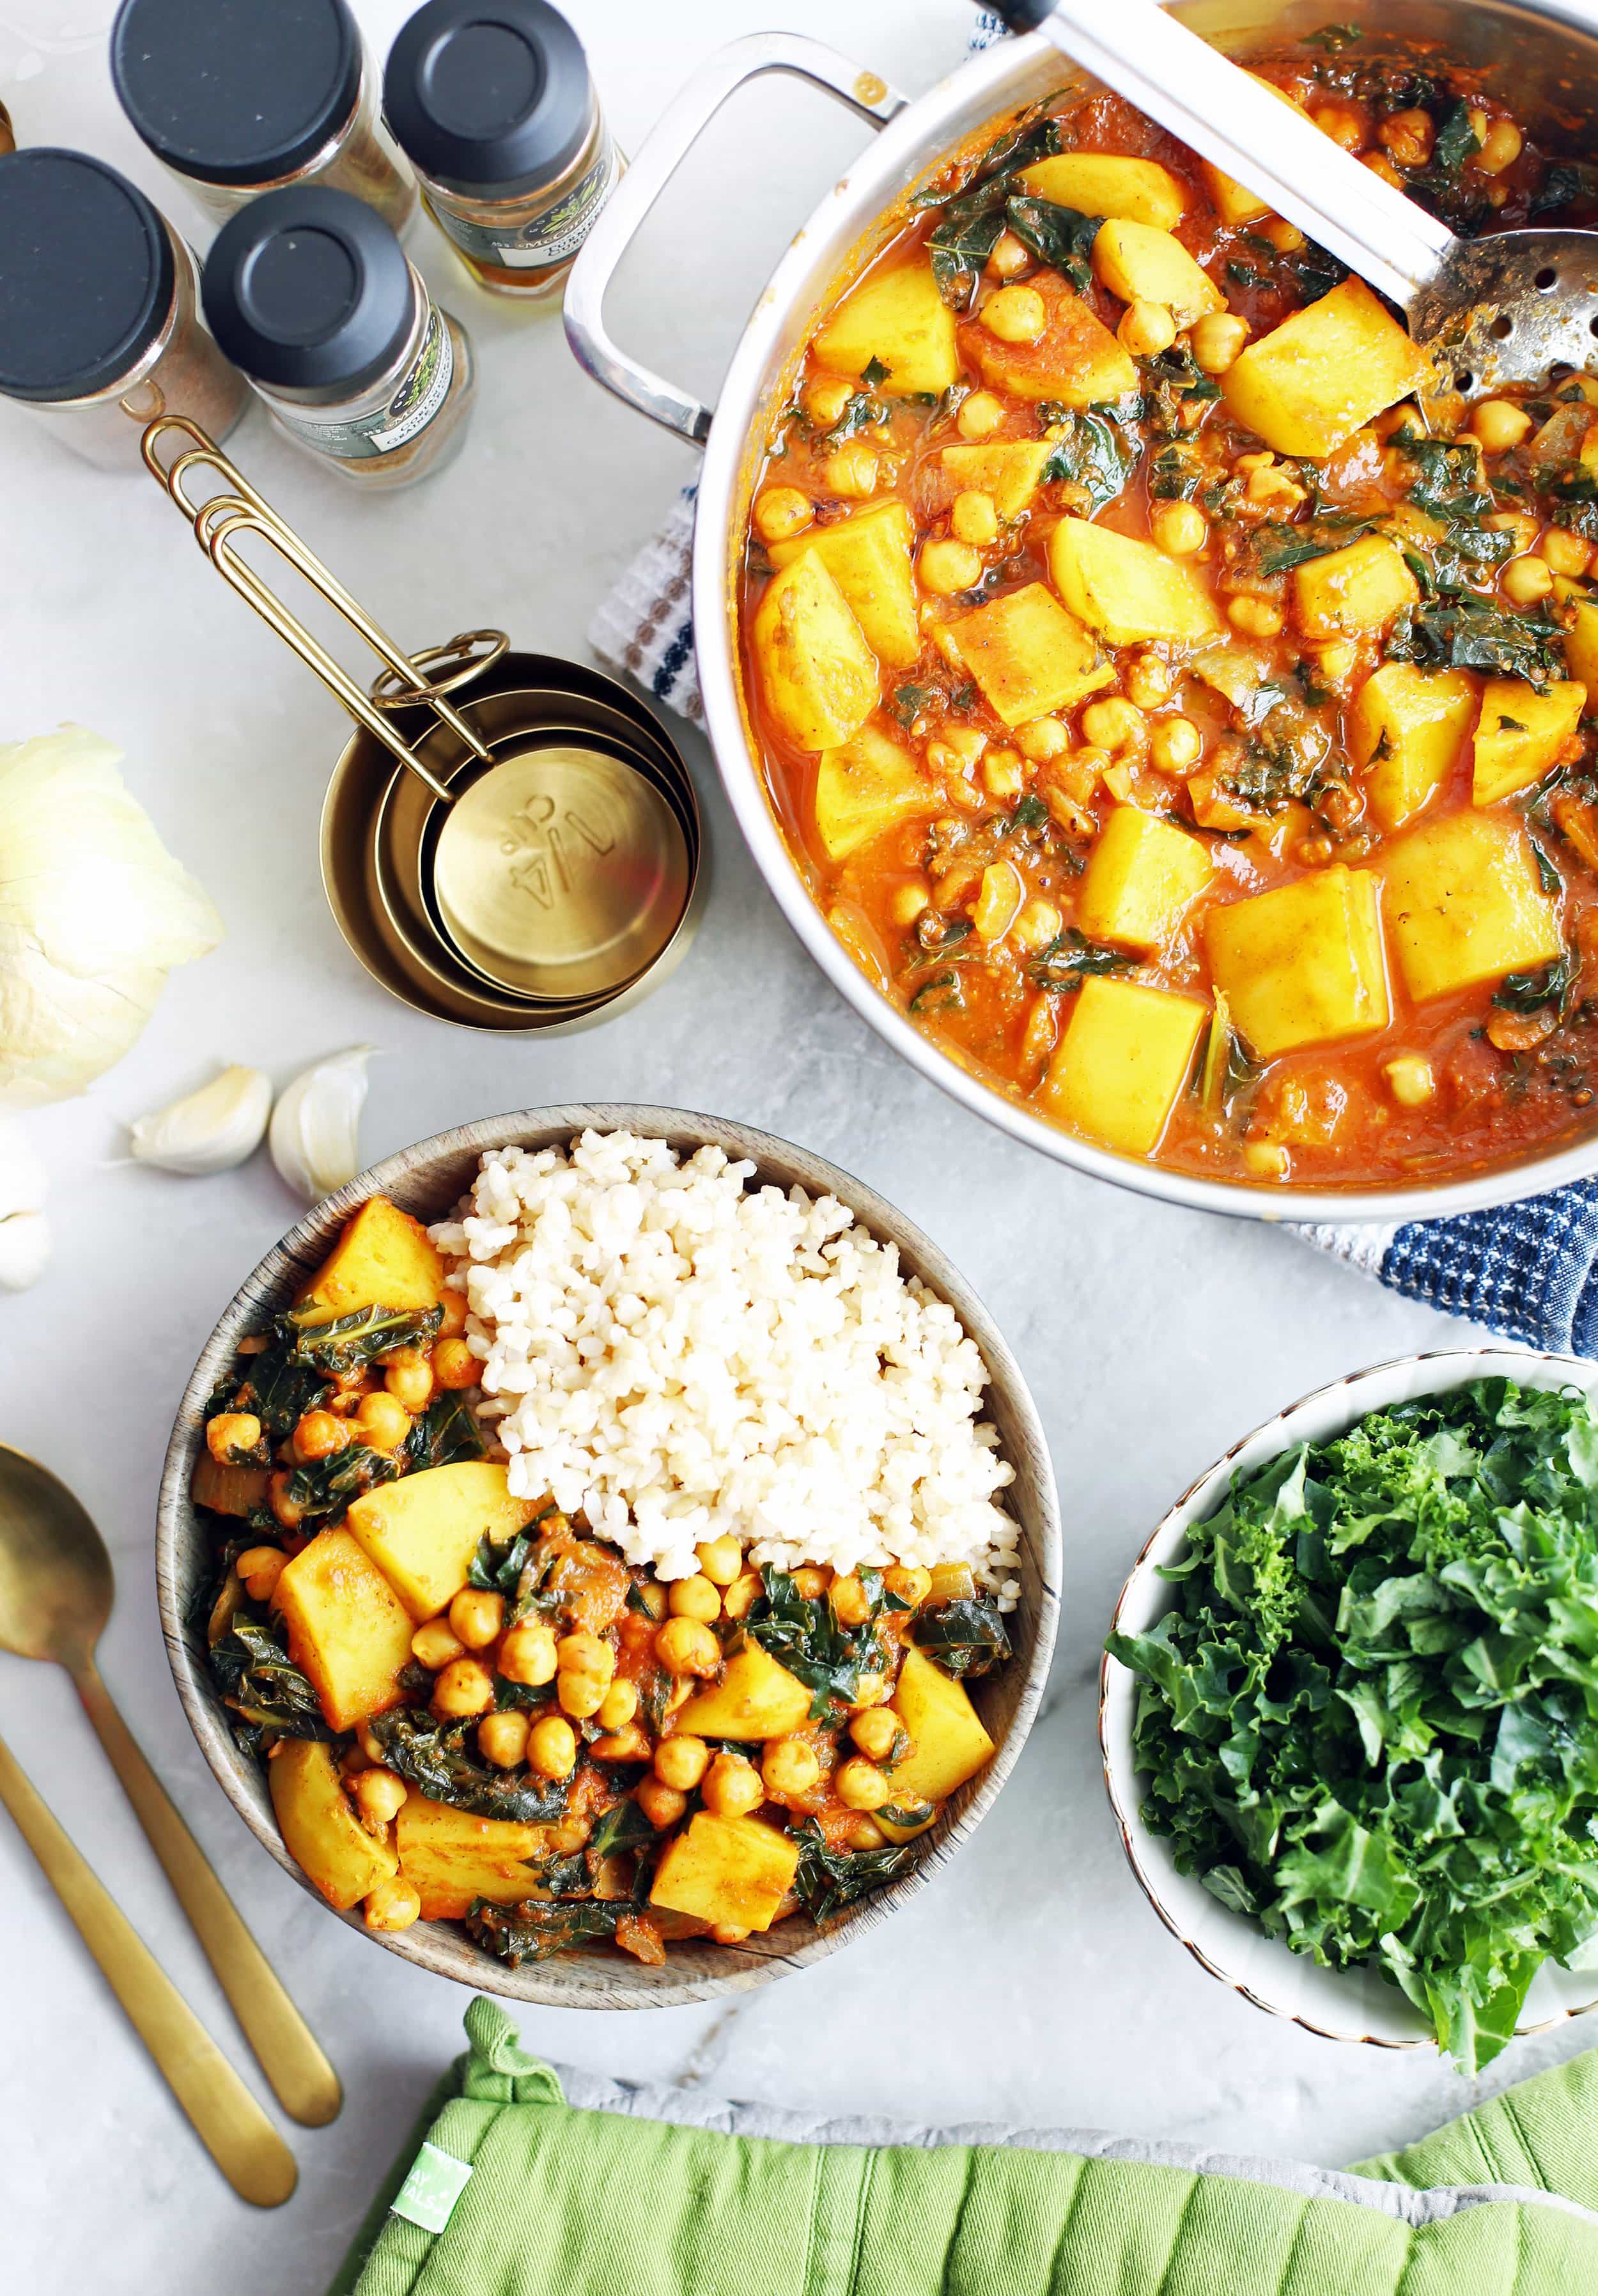 An overhead view of a bowl of chickpea kale and potato curry, a pot of curry, and a bowl of raw kale.